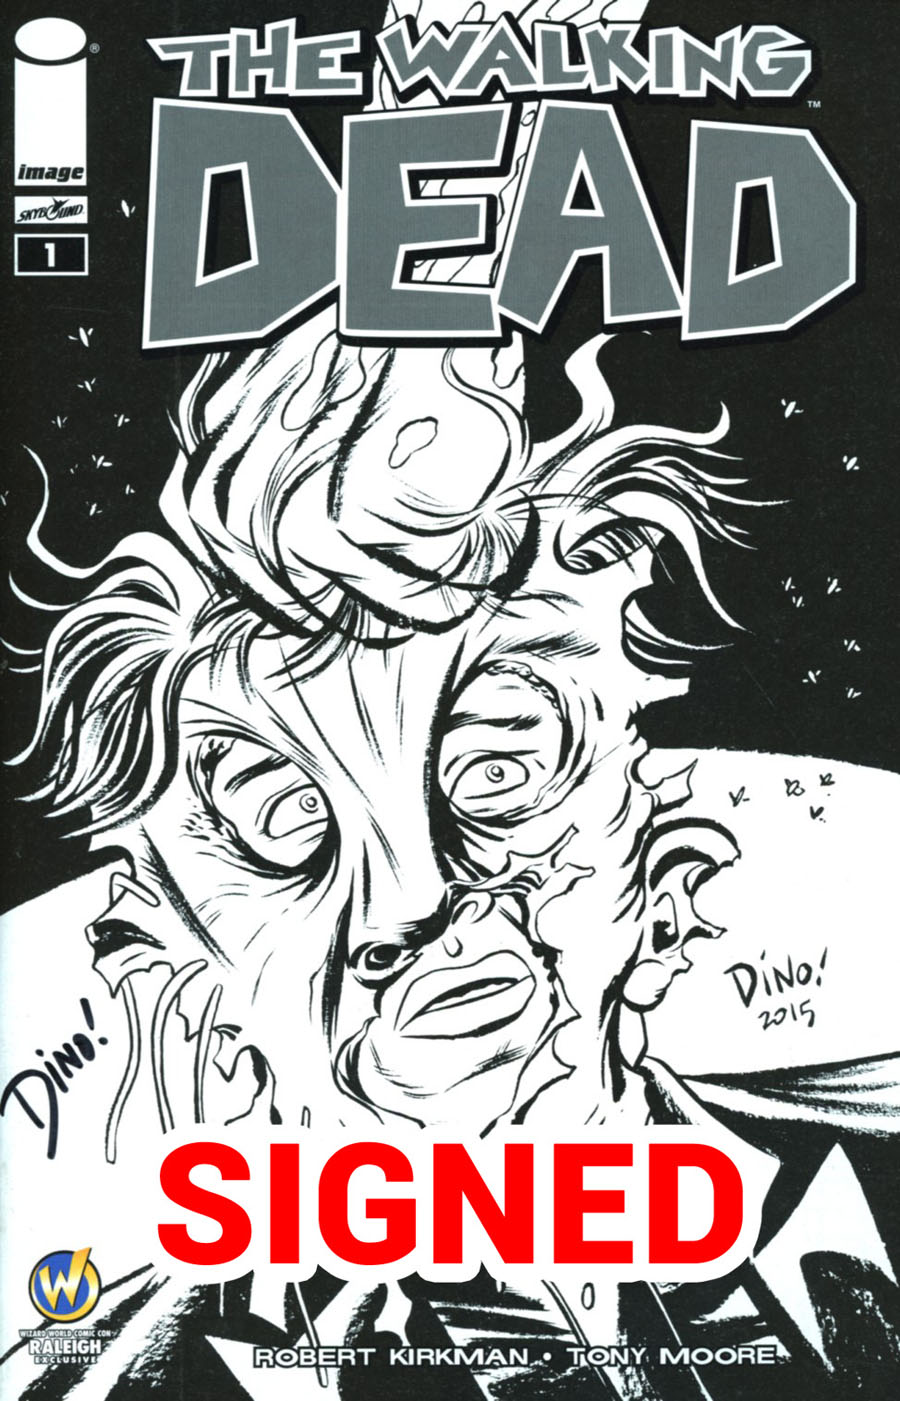 Walking Dead #1 Cover Z-O Wizard World Comic Con Raleigh VIP Exclusive Dean Haspiel Sketch Variant Cover Signed By Dean Haspiel